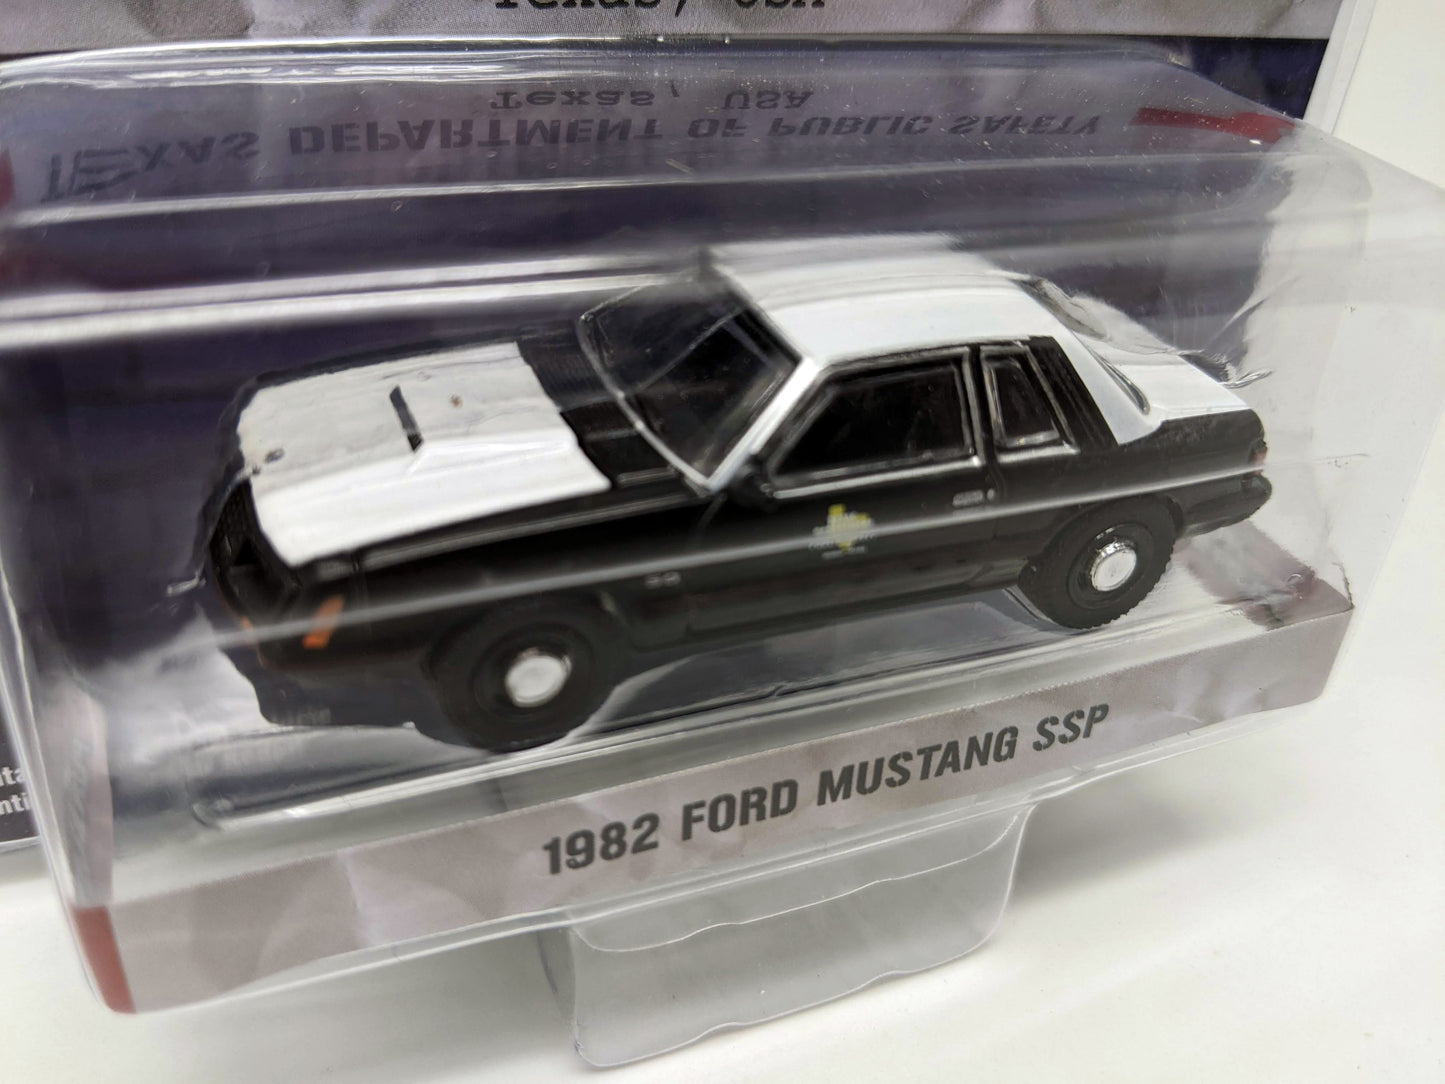 GL - 1982 Ford Mustang SSP Texas Department of Public Safety - Hot Pursuit